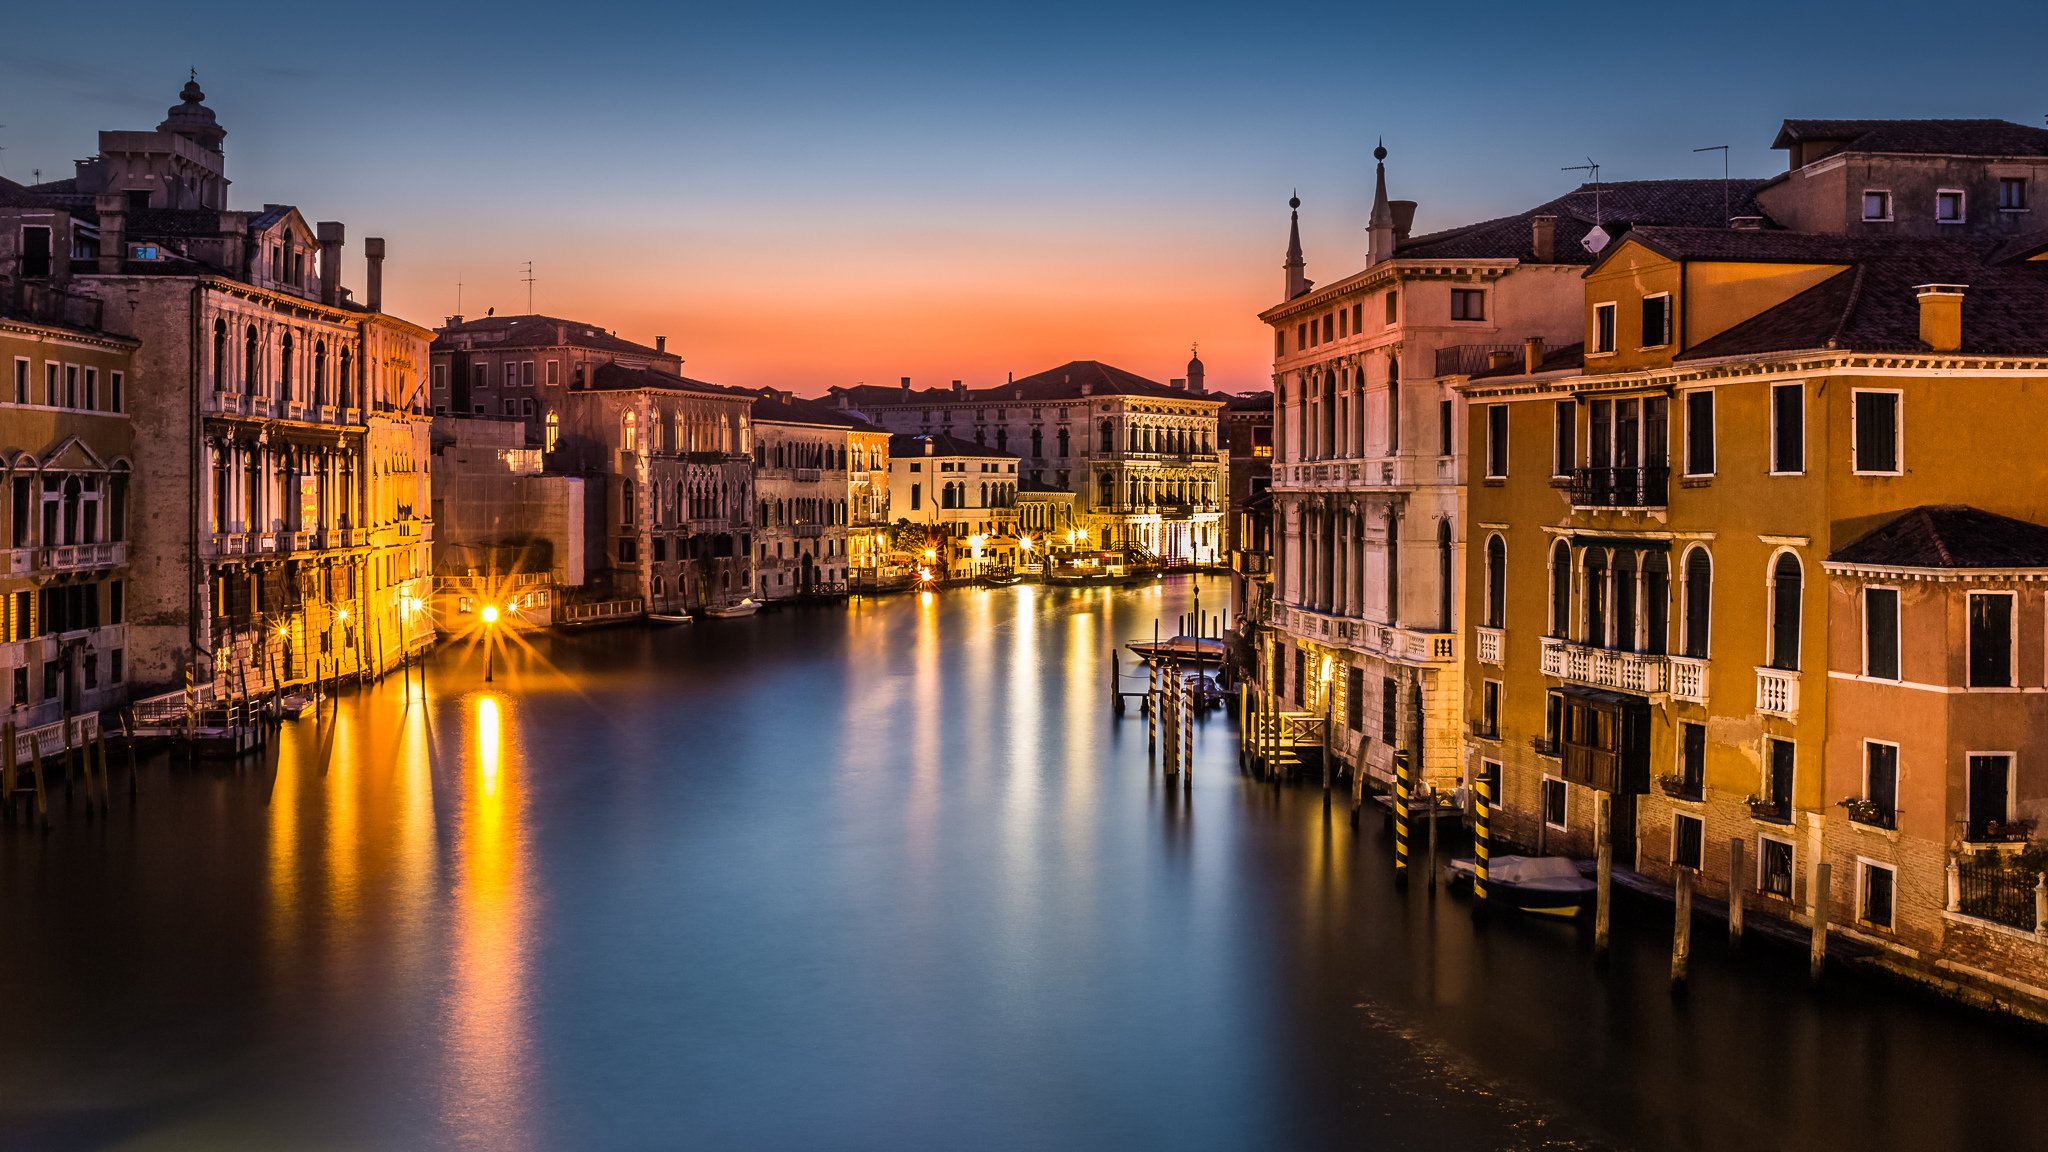 venice, Italy, Canal, Grande, City, Night, Lights, Lamps, Lights, Houses, Buildings, Roofs, Sea, Gondola, Boats Wallpaper